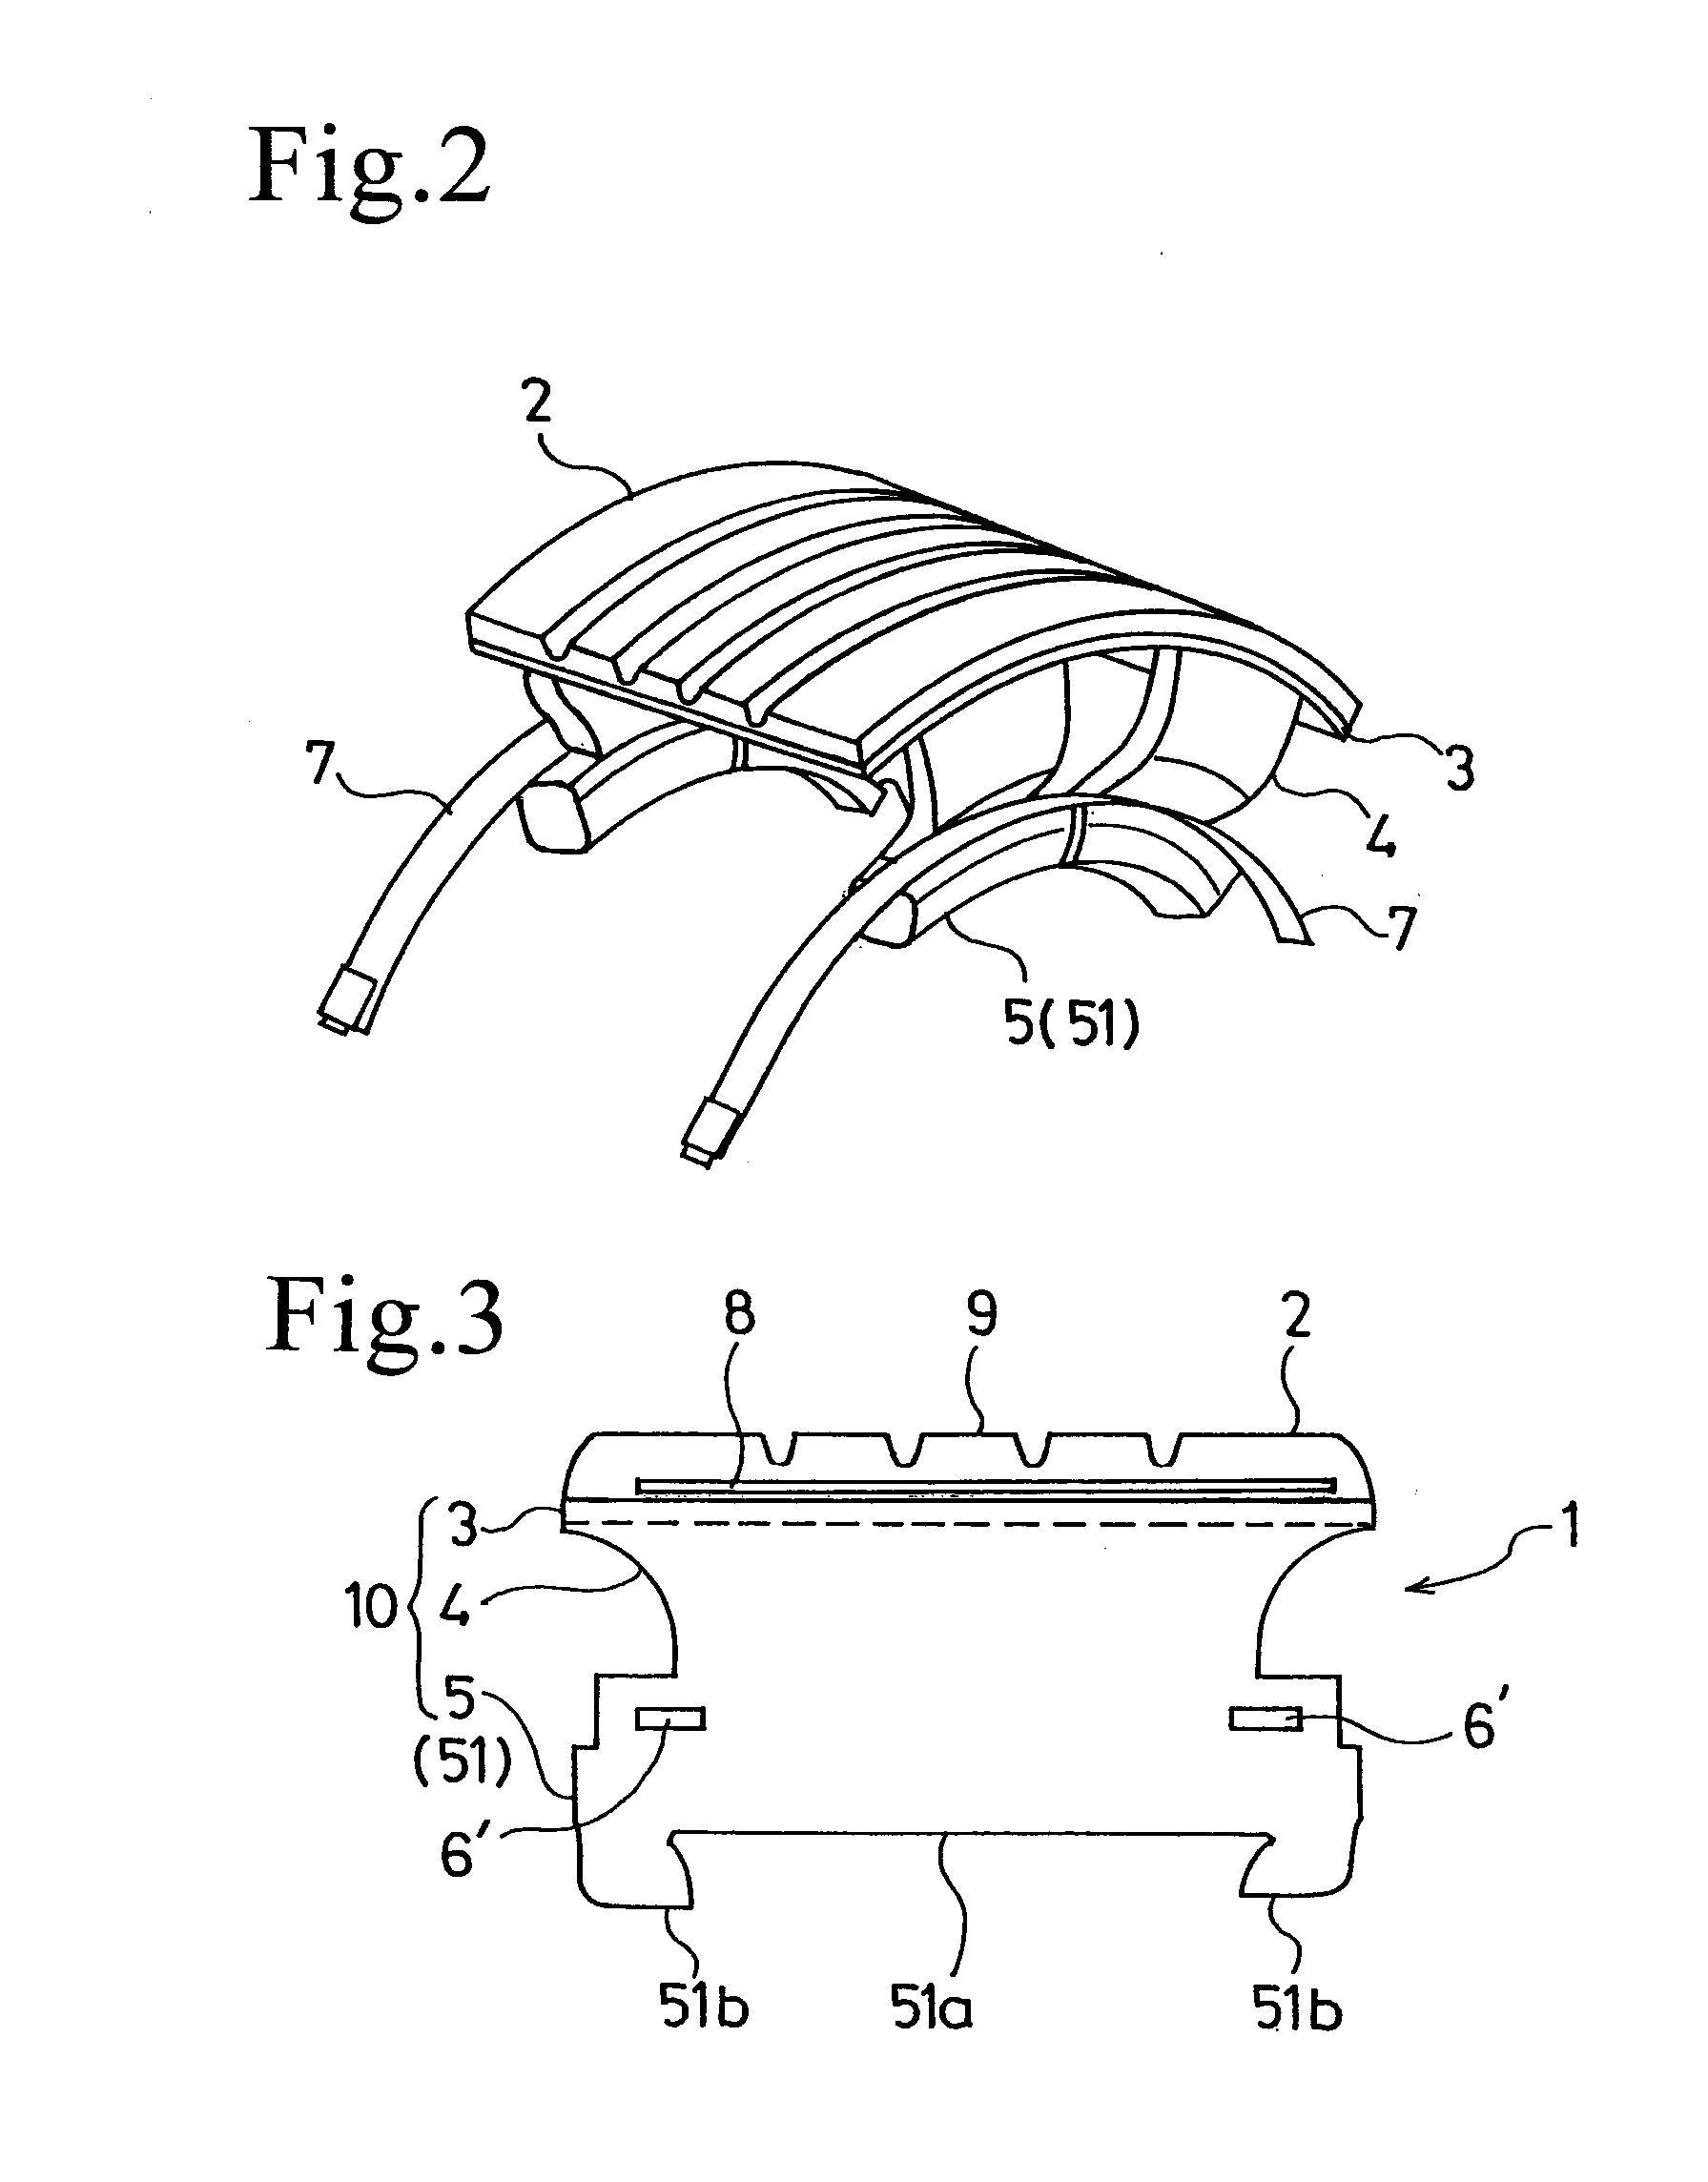 Non-pneumatic tire and method of manufacturing same